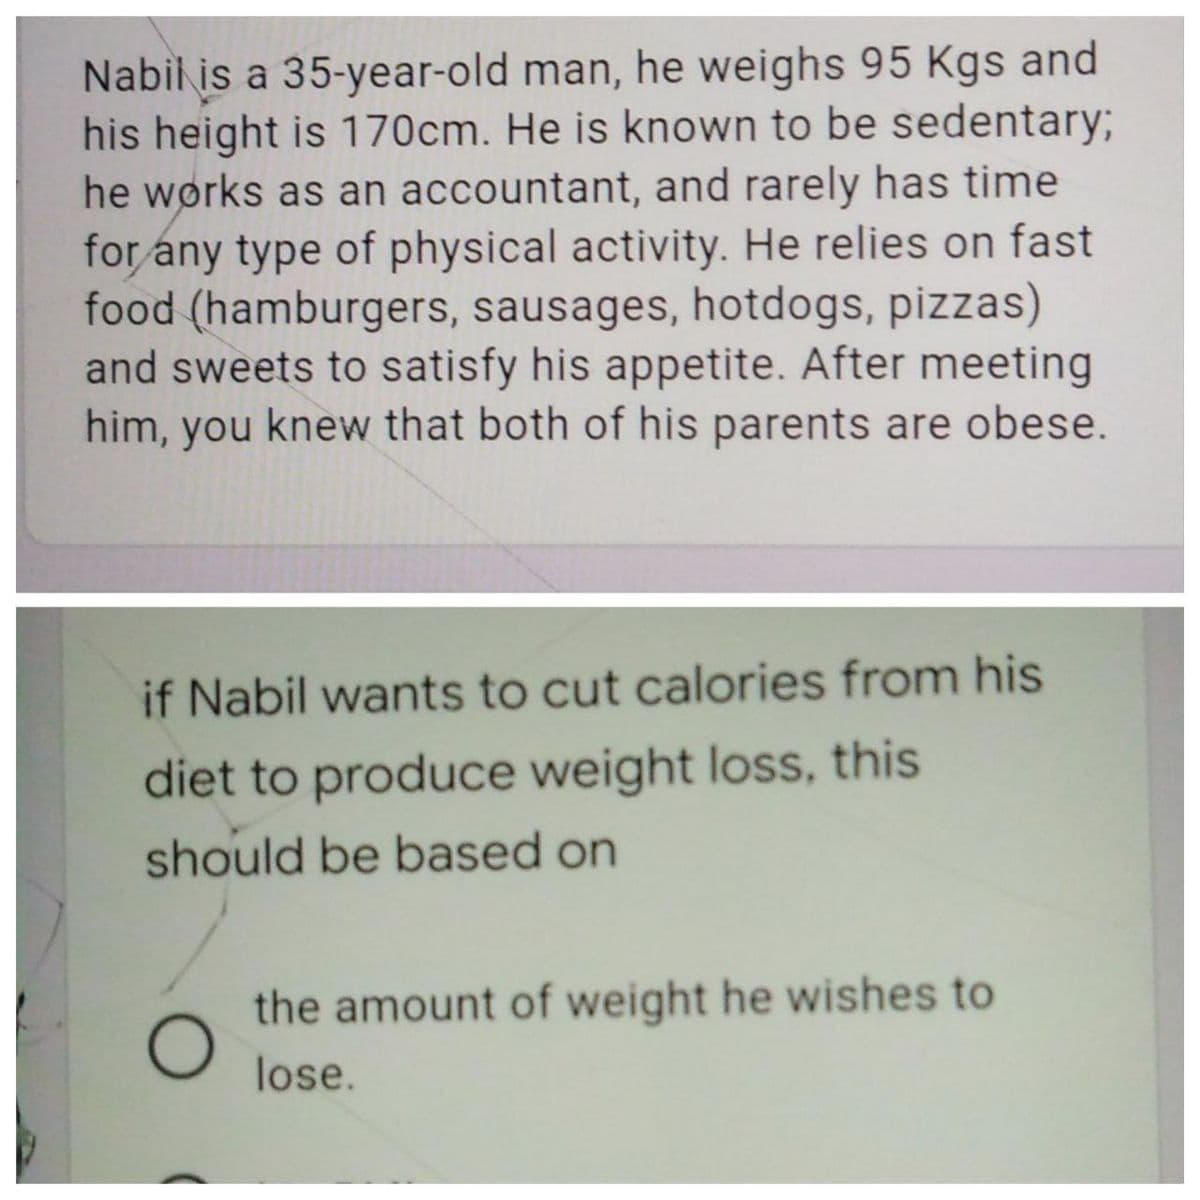 Nabil is a 35-year-old man, he weighs 95 Kgs and
his height is 170cm. He is known to be sedentary;
he wørks as an accountant, and rarely has time
for any type of physical activity. He relies on fast
food (hamburgers, sausages, hotdogs, pizzas)
and sweets to satisfy his appetite. After meeting
him, you knew that both of his parents are obese.
if Nabil wants to cut calories from his
diet to produce weight loss, this
should be based on
the amount of weight he wishes to
lose.
